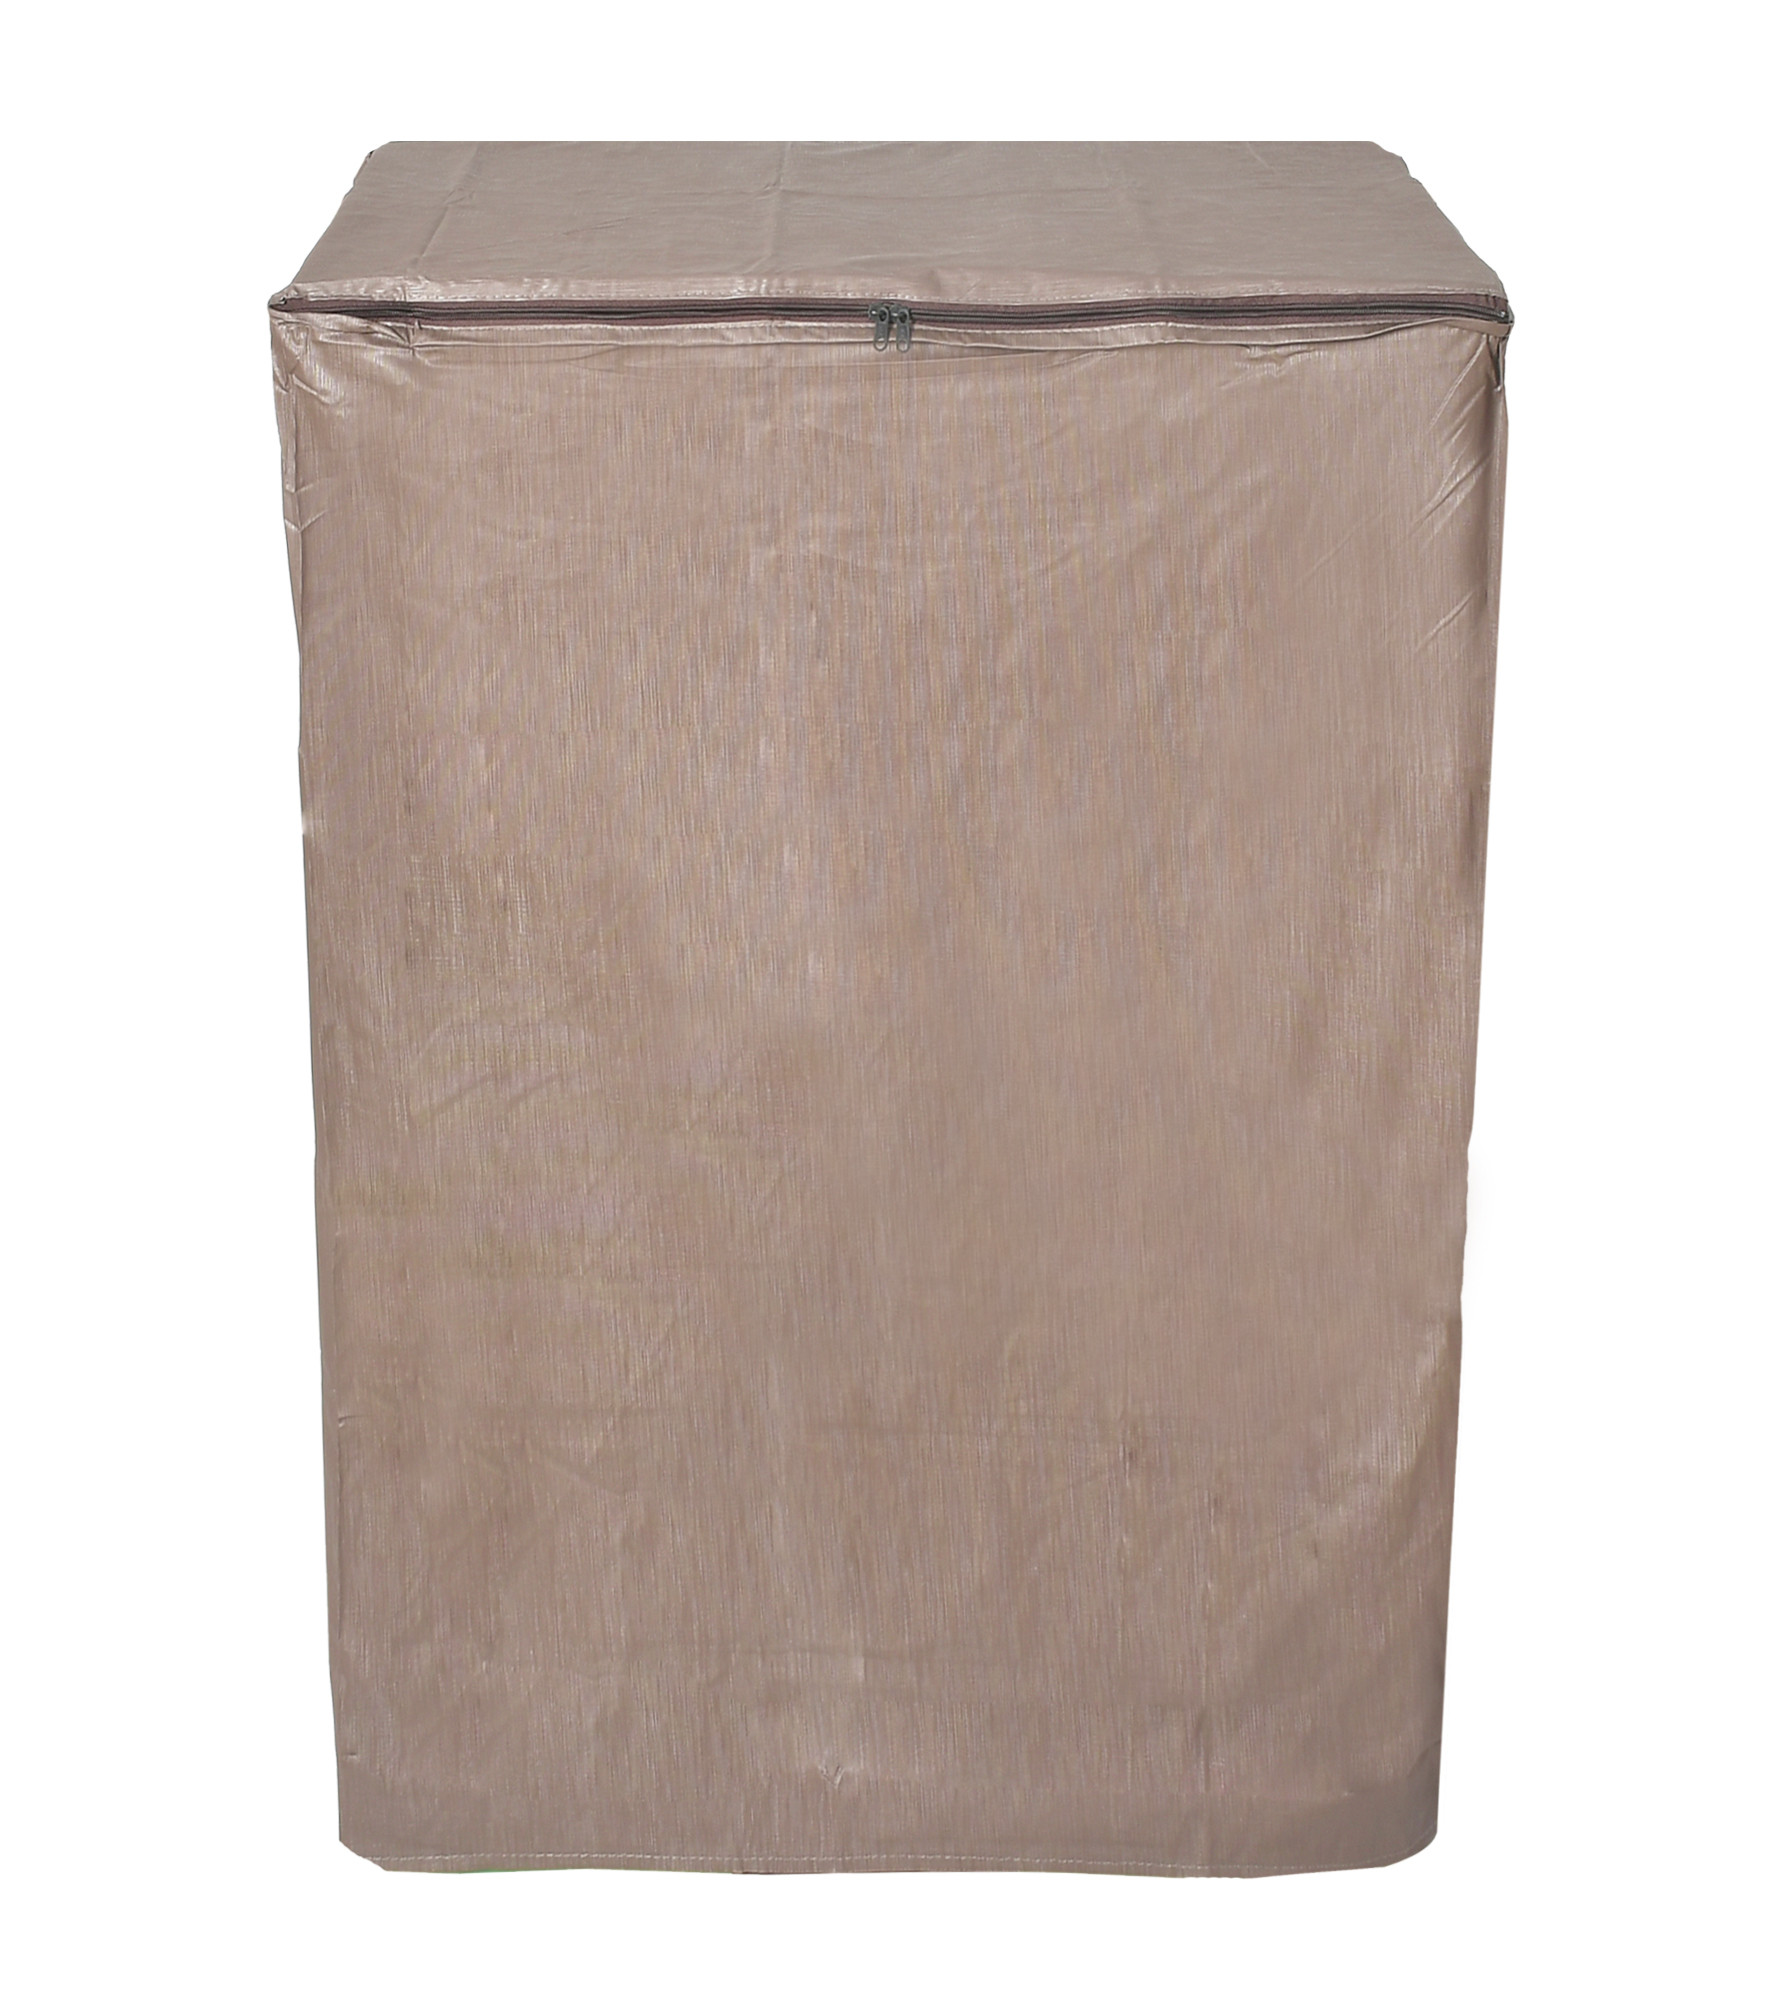 Kuber Industries Water Proof Dust Proof PVC Top Load Washing Machine Cover (Brown)-HS43KUBMART26747